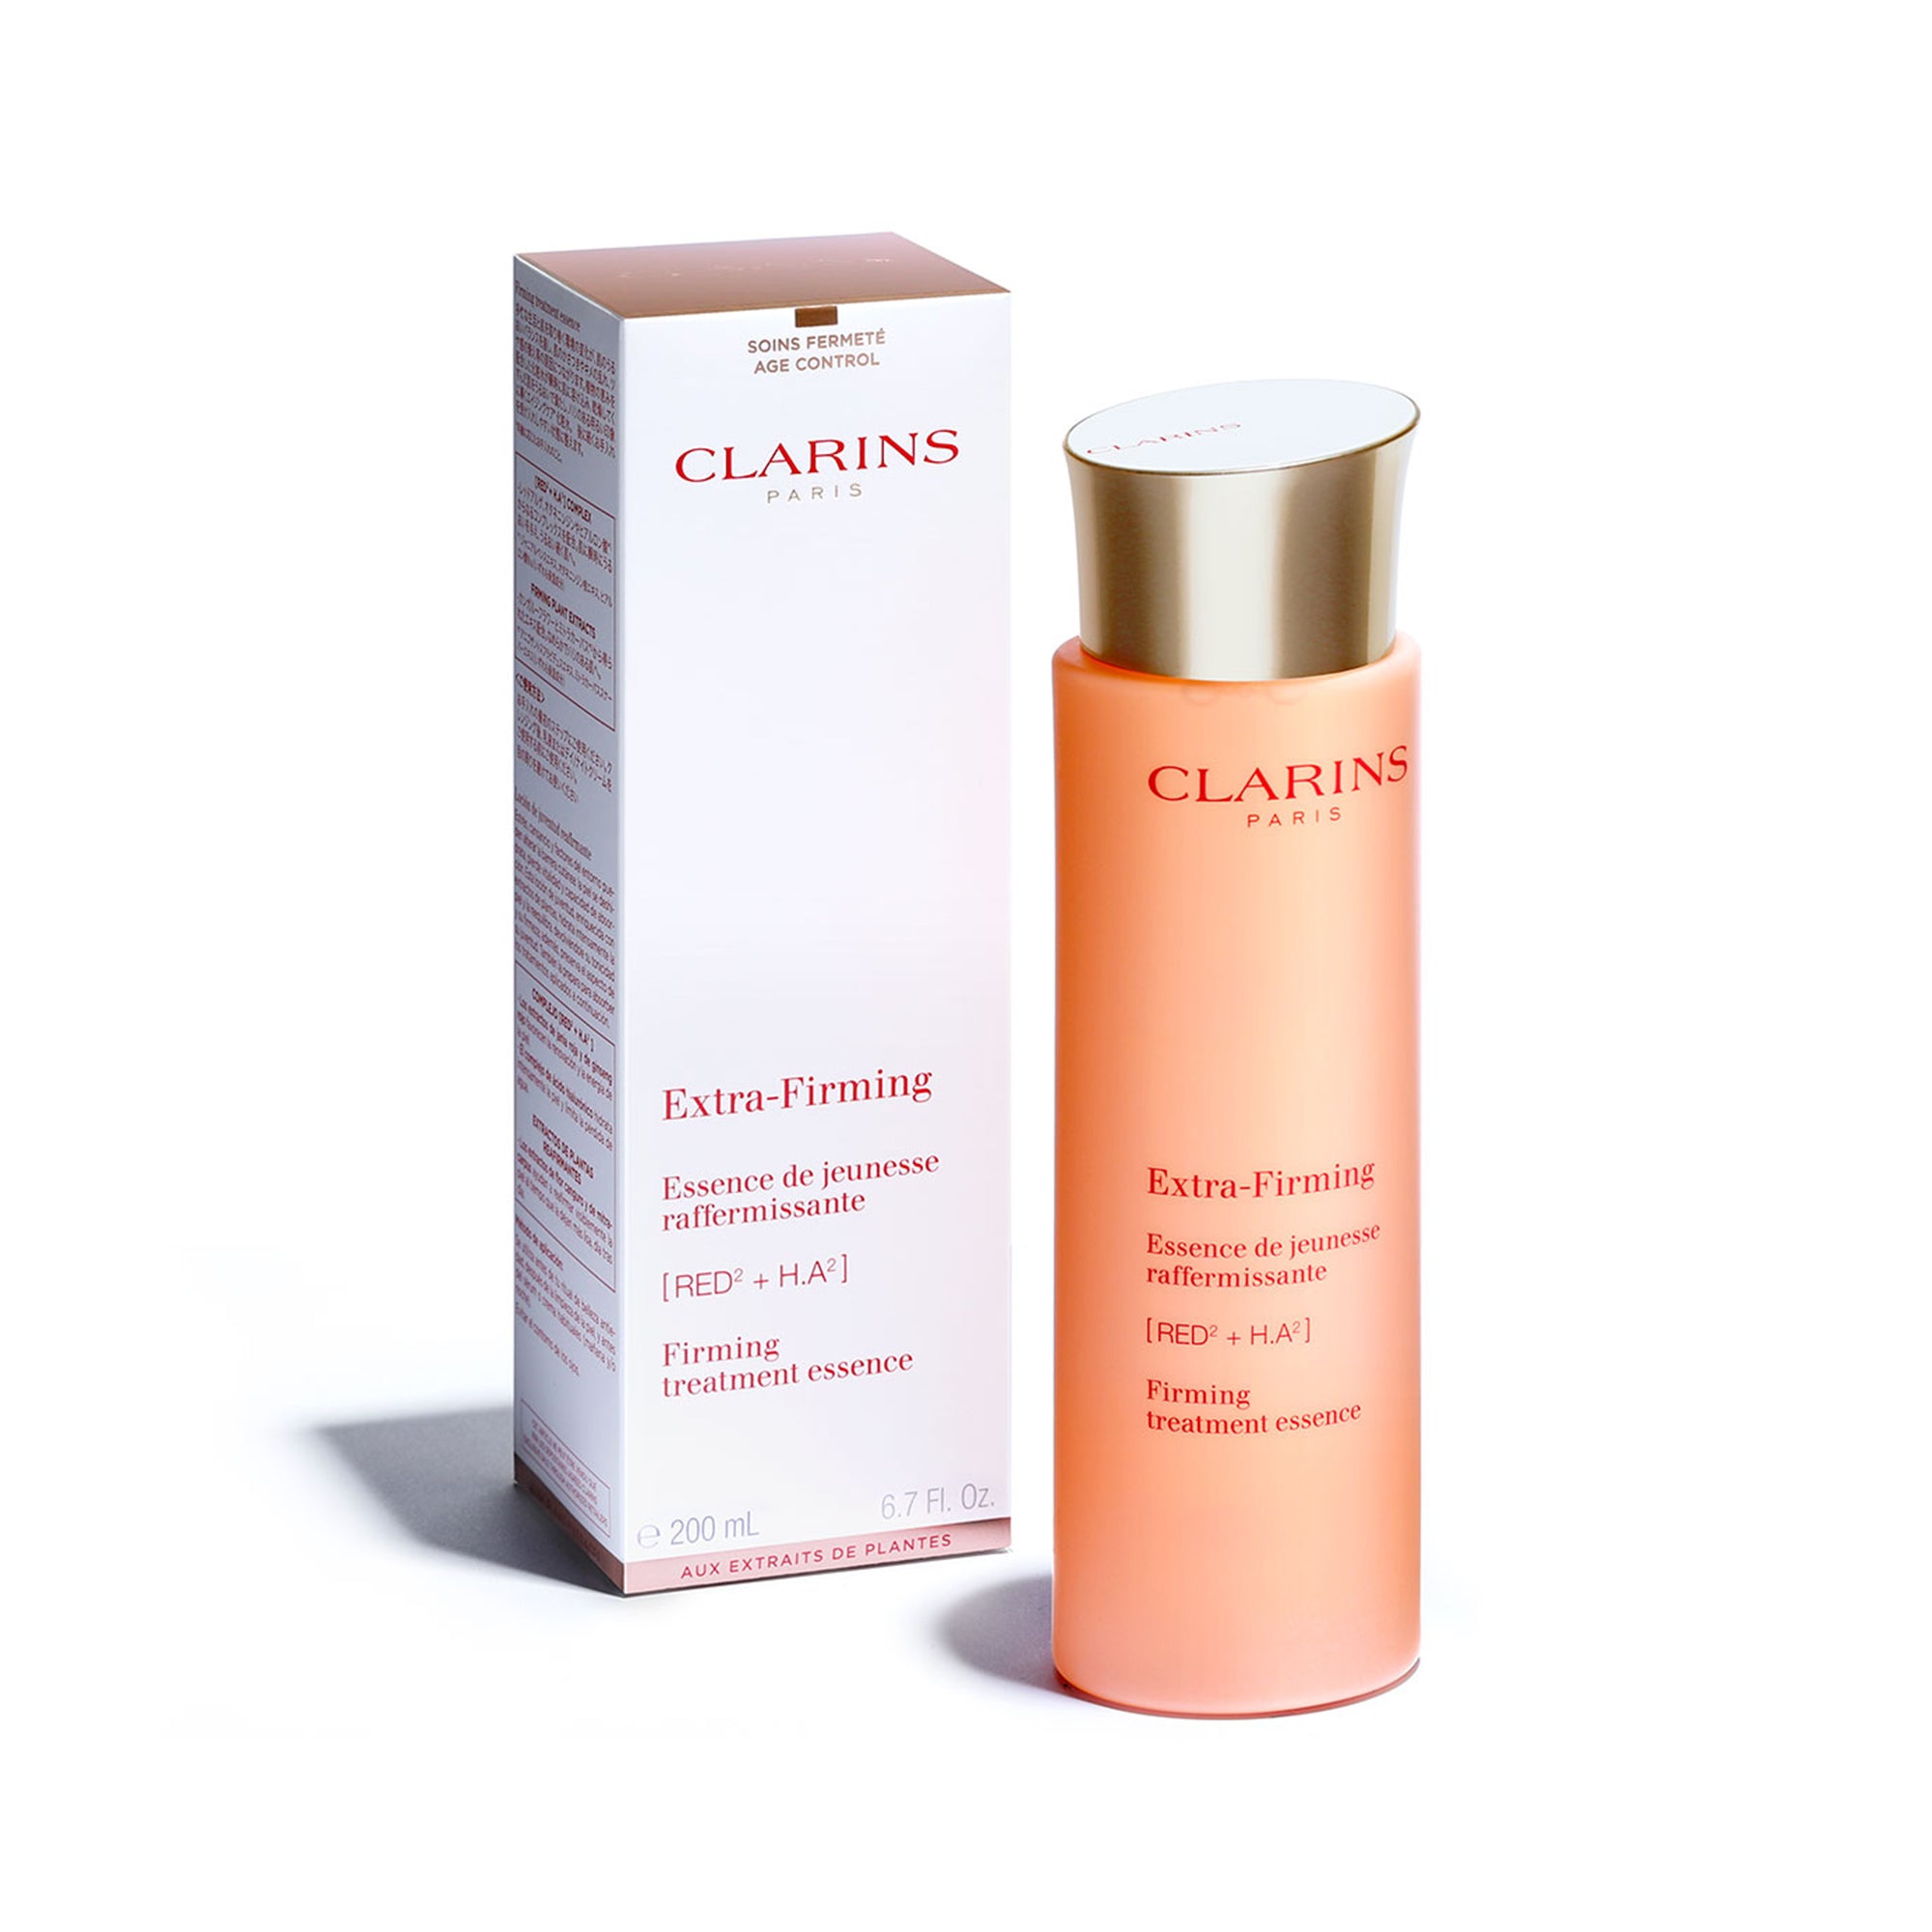 Clarins Extra Firming Firming Treatment Essence 200ml Image